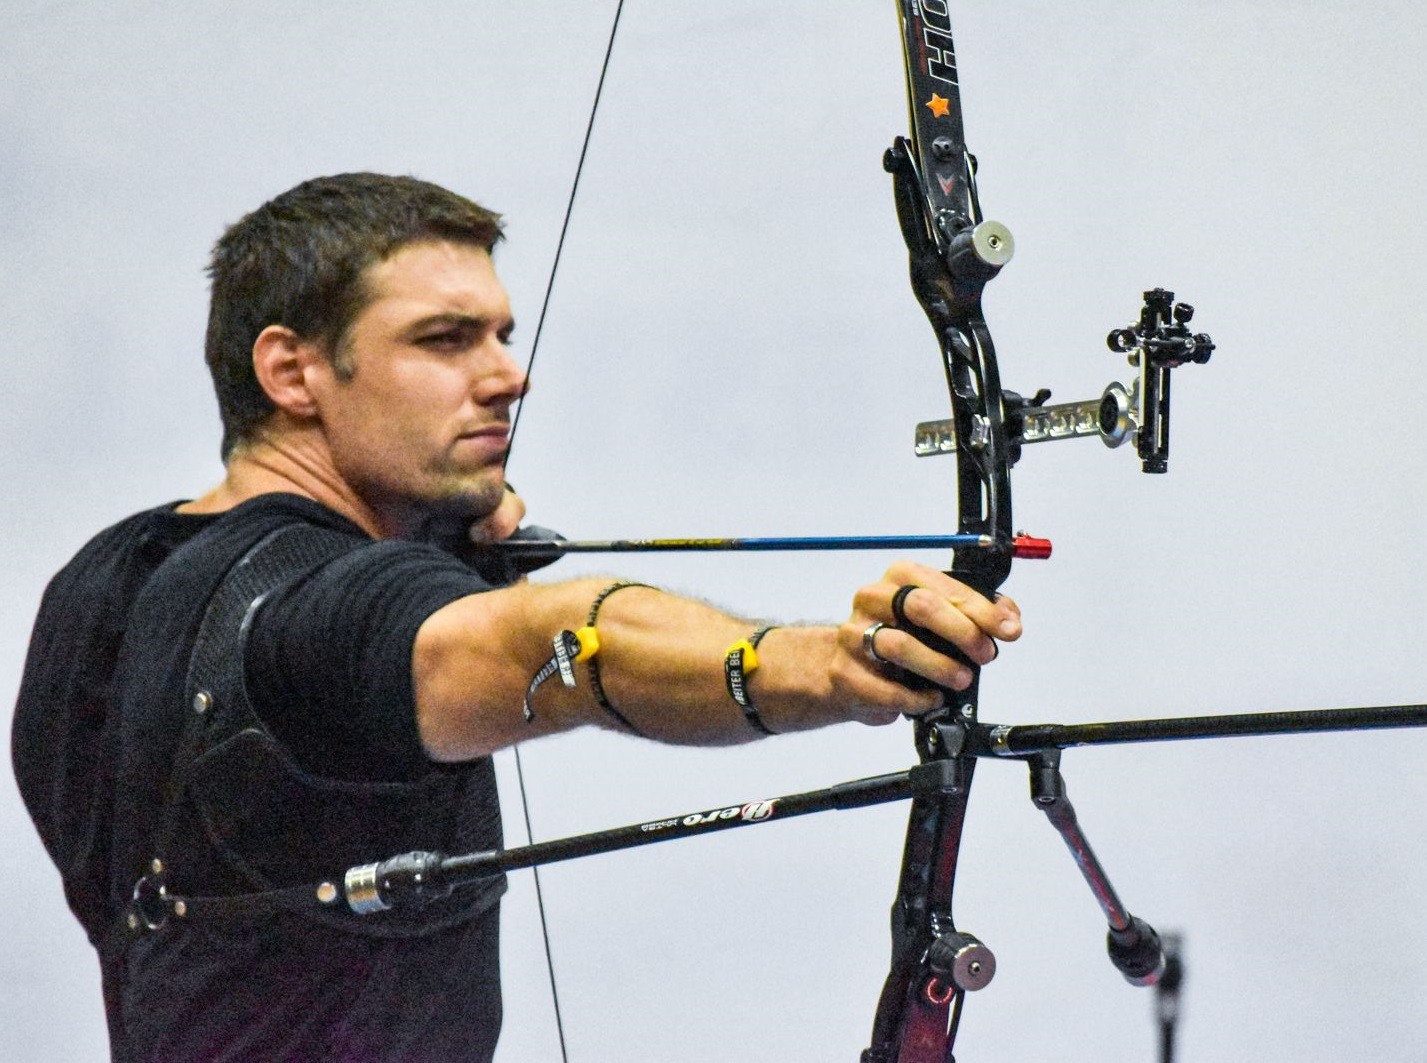 Barnes tops overall rankings after home victory at Indoor Archery World Series in Sydney